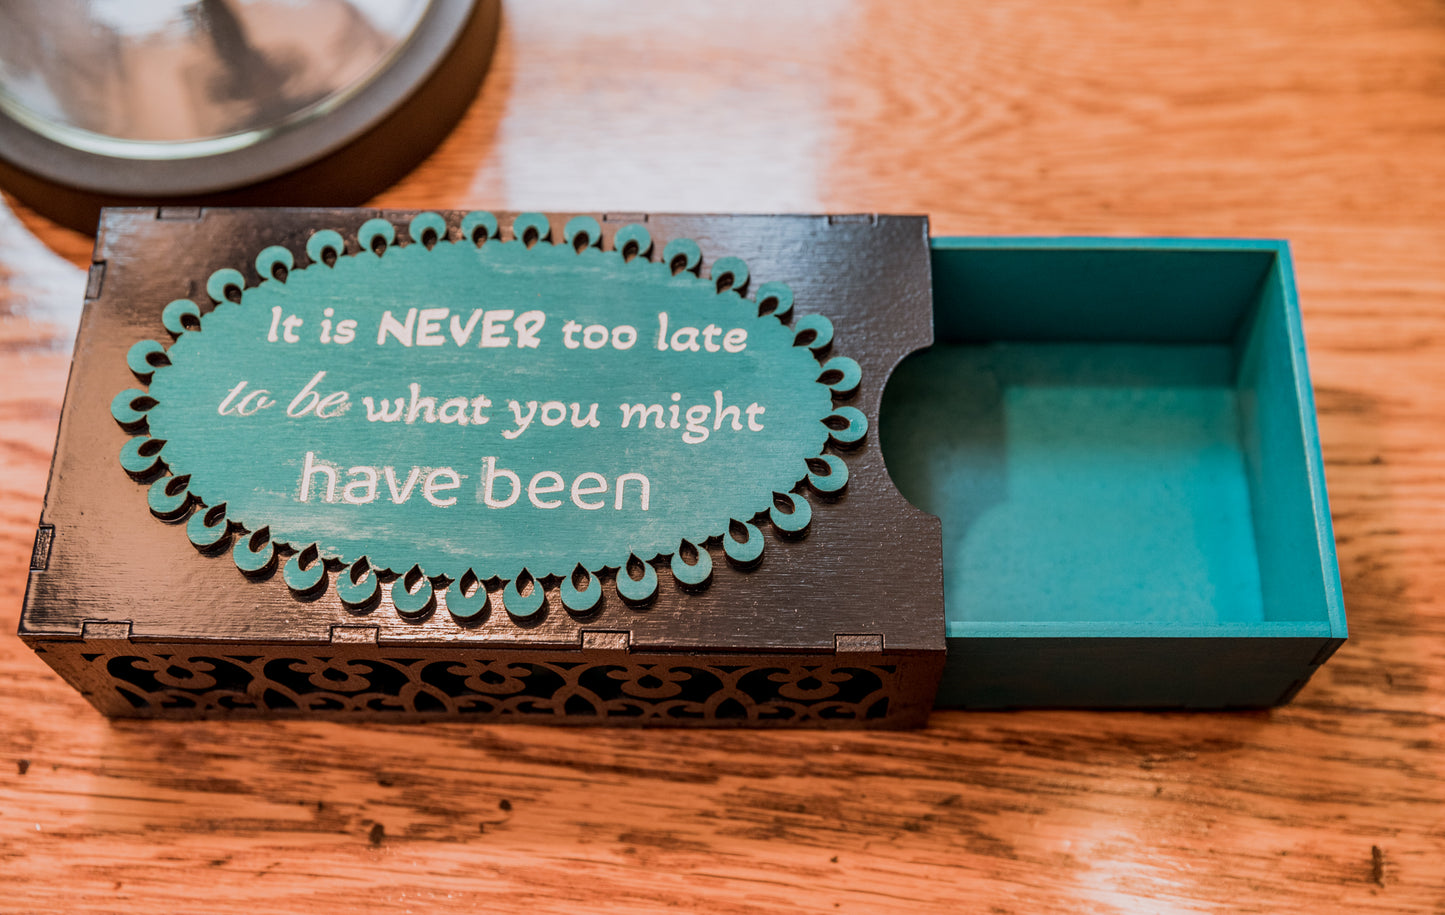 Intricate Box ("It is Never Too Late")